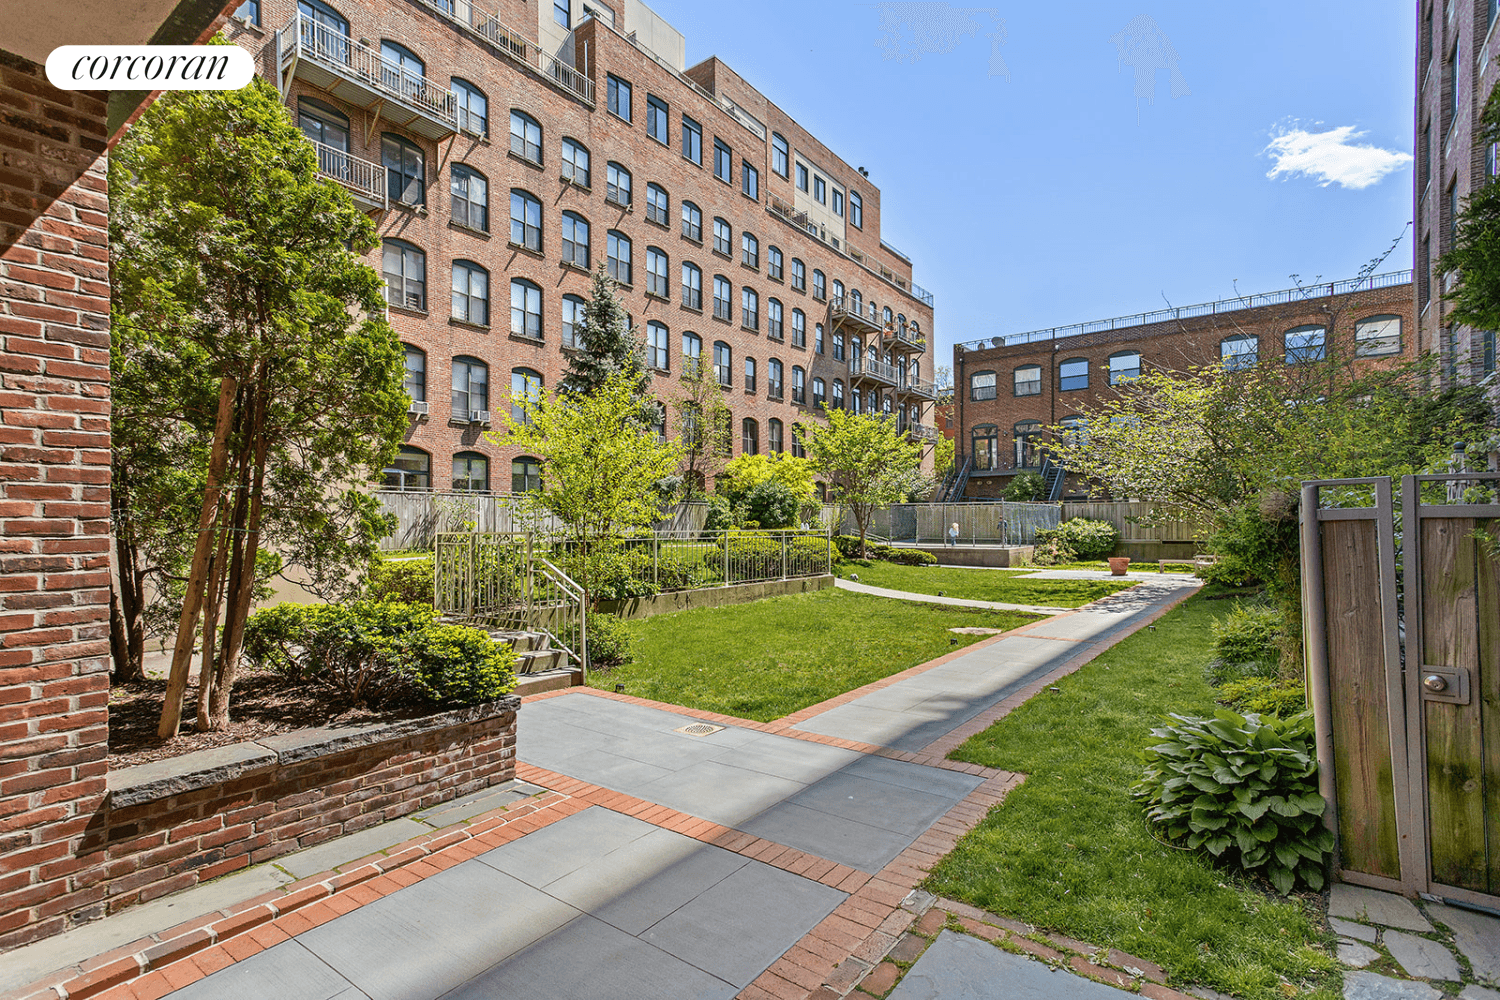 438 12th Street, 2A amp ; Parking on the BlockThis impressive and spacious 3 bedroom, 2 bathroom, 2nd floor condominium is now available at the coveted Ansonia Clockworks factory, a ...